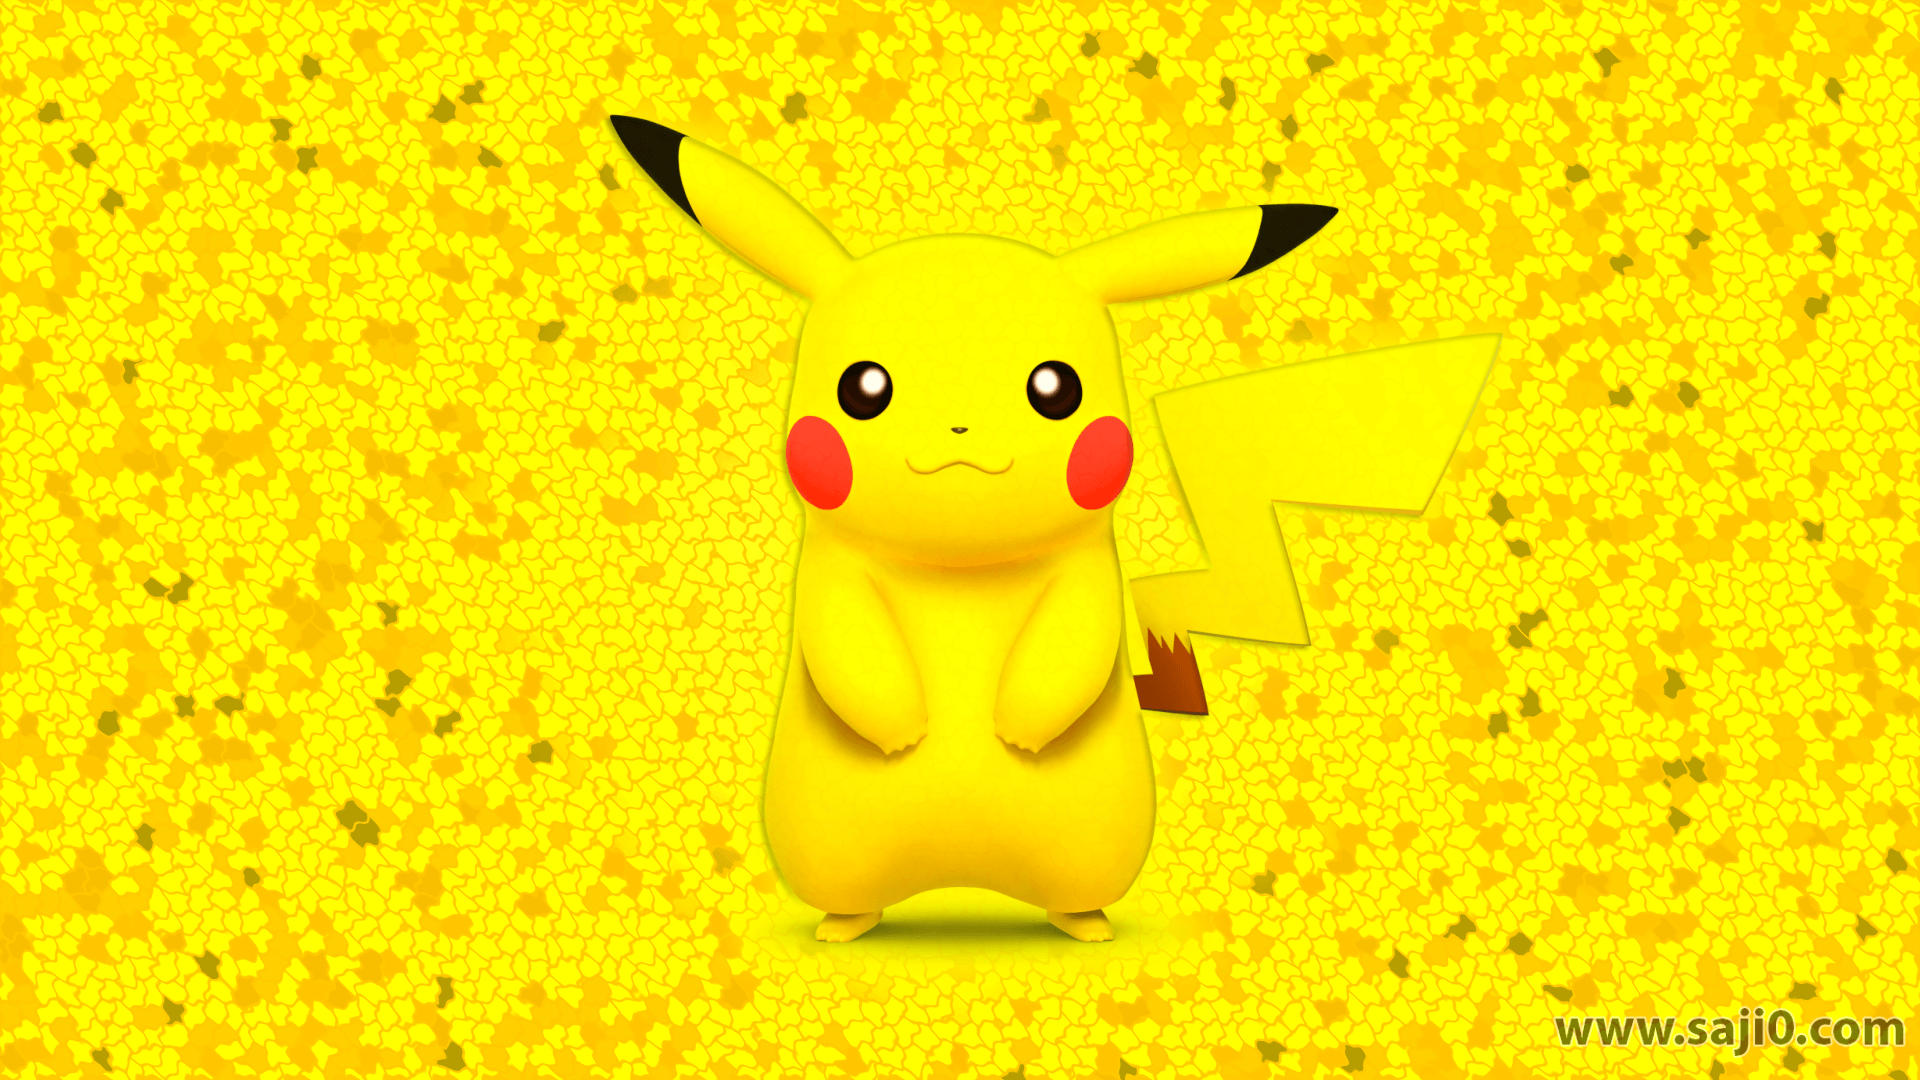 Pikachu picture and wallpaper of Pokemon 2021 HD